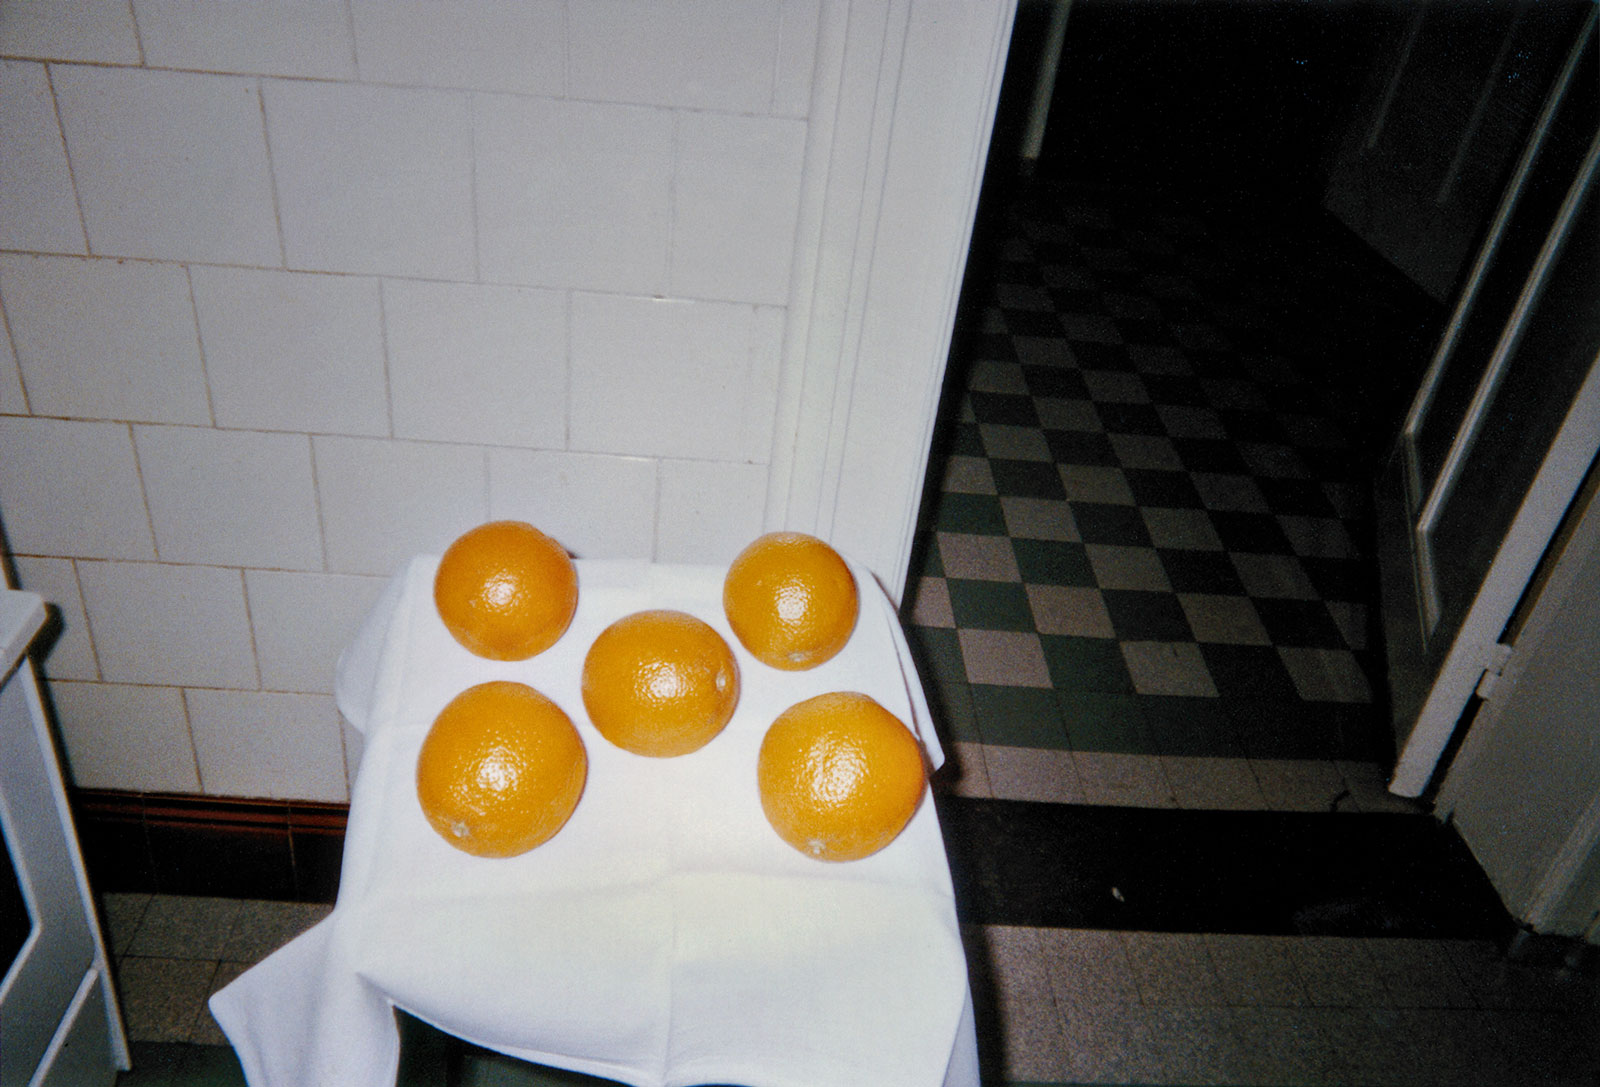 five oranges on a small white-clothed table in what appears to be a tiled kitchen